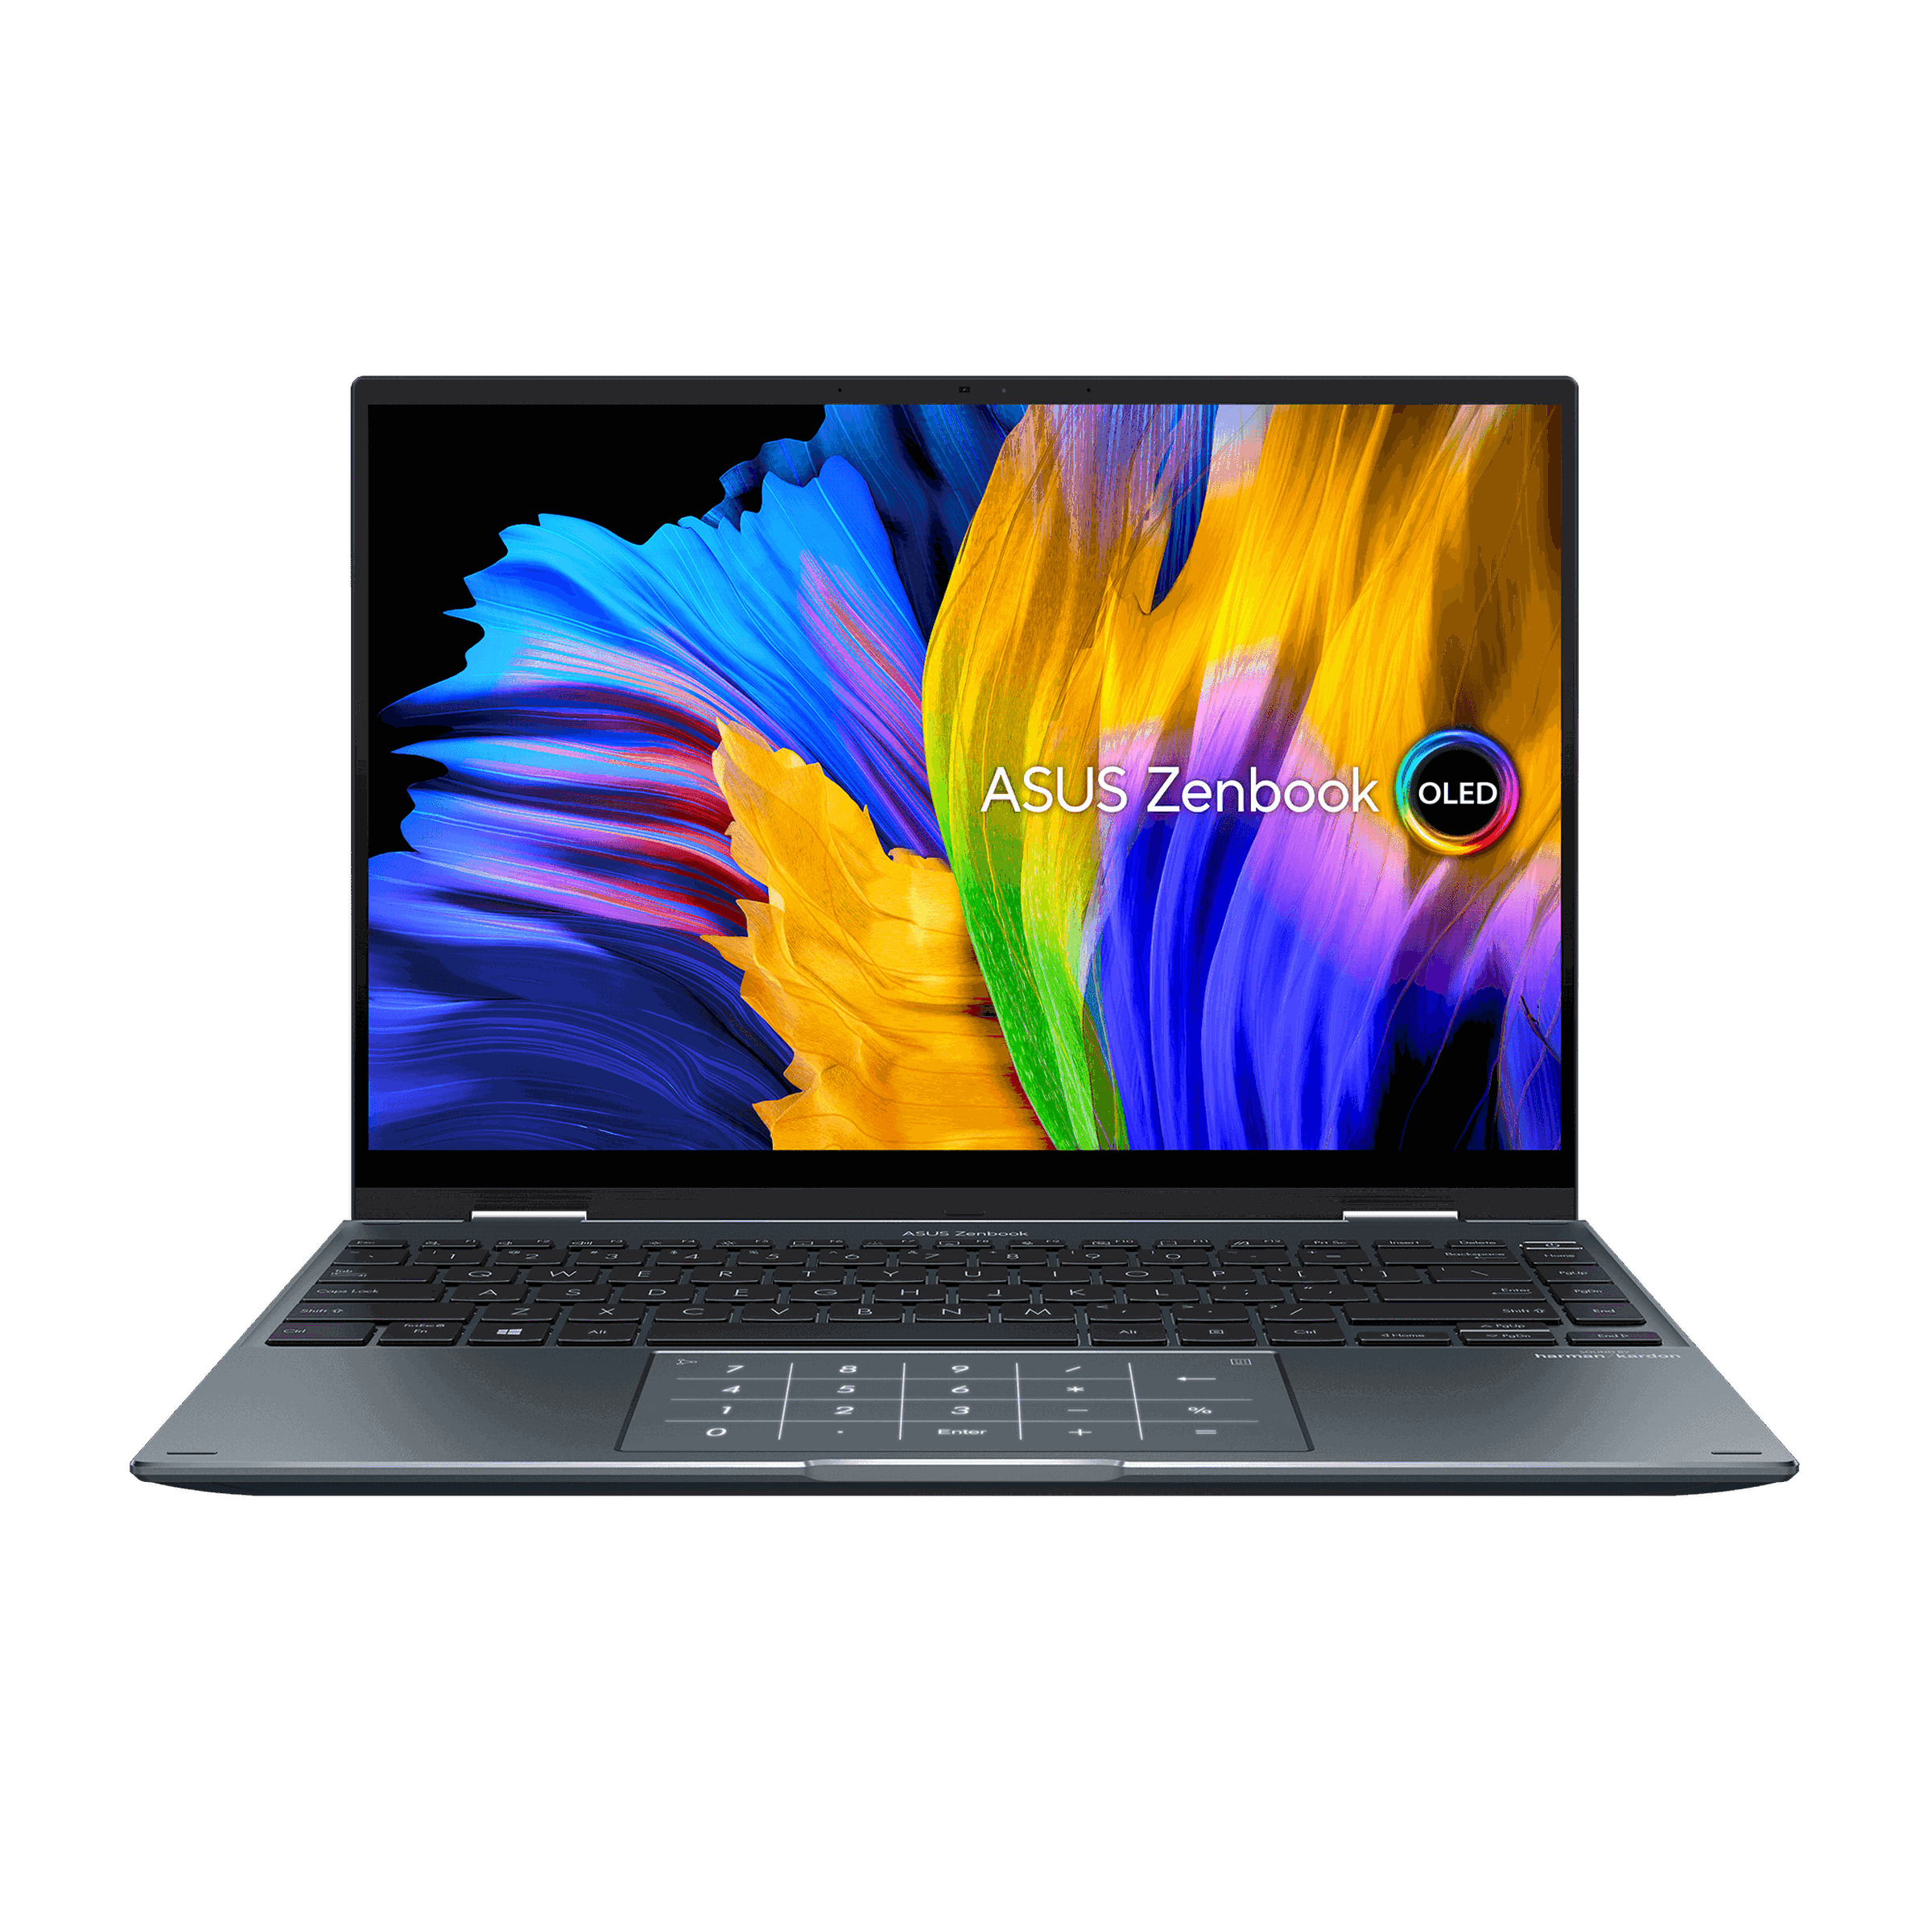 The Asus Zenbook Flip 14 OLED open facing the camera with the number pad illuminated. The screen displays a multicolored flower background with the Asus Zenbook OLED logo on the right side.